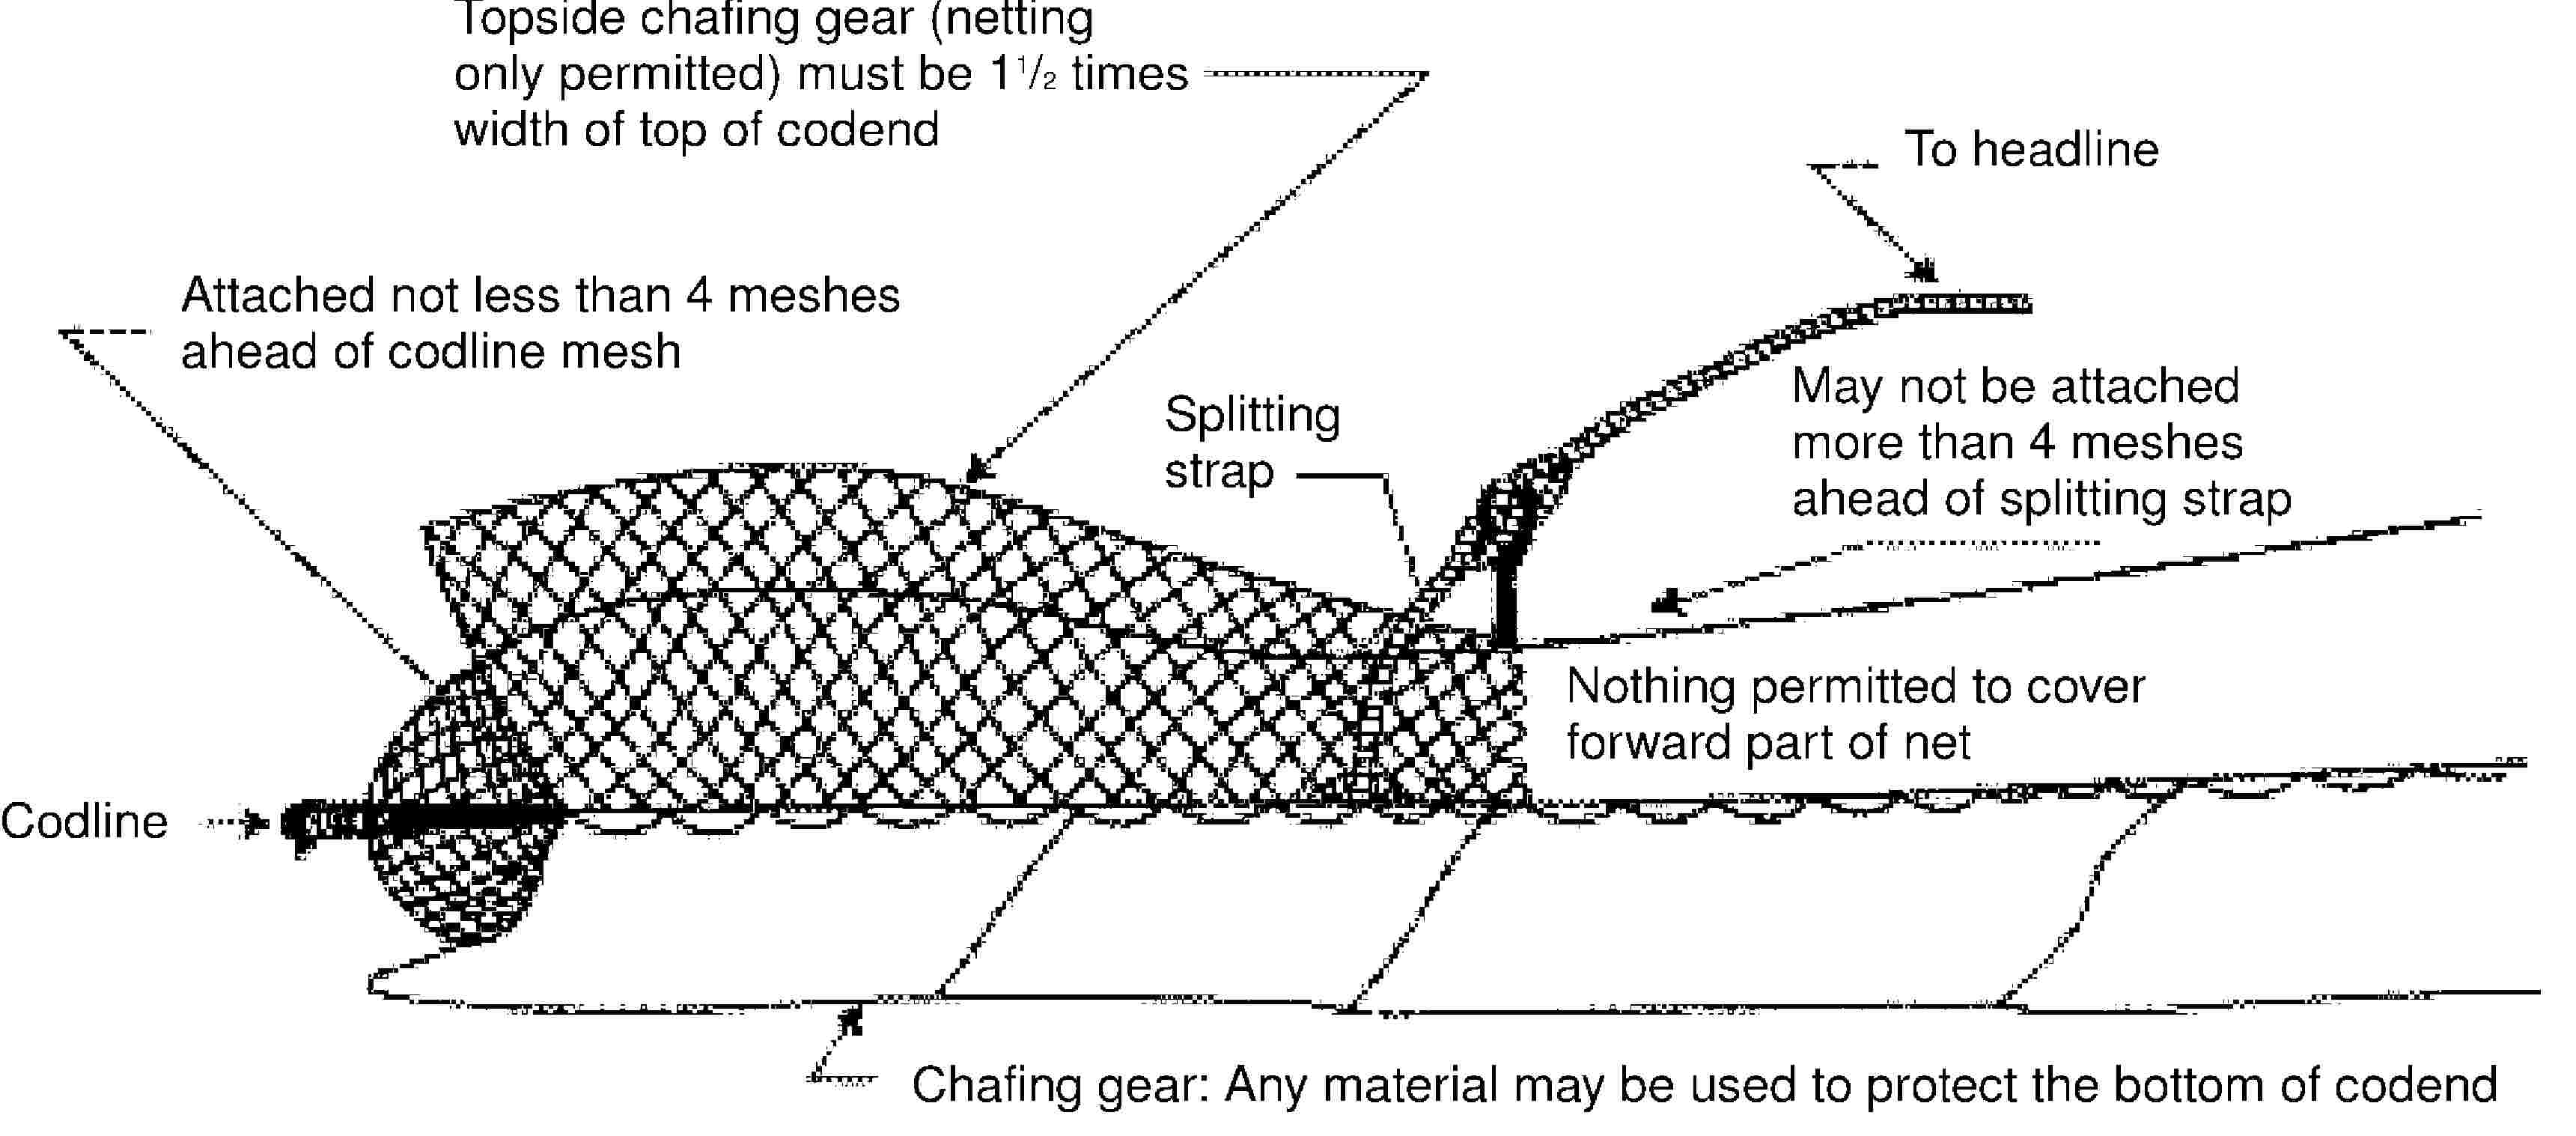 Topside chafing gear (netting only permitted) must be 11/2 times width of top of codendTo headlineAttached not less than 4 meshes ahead of codline meshSplitting strapMay not be attached more than 4 meshes ahead of splitting strapNothing permitted to cover forward part of netCodlineChafing gear: Any material may be used to protect the bottom of codend